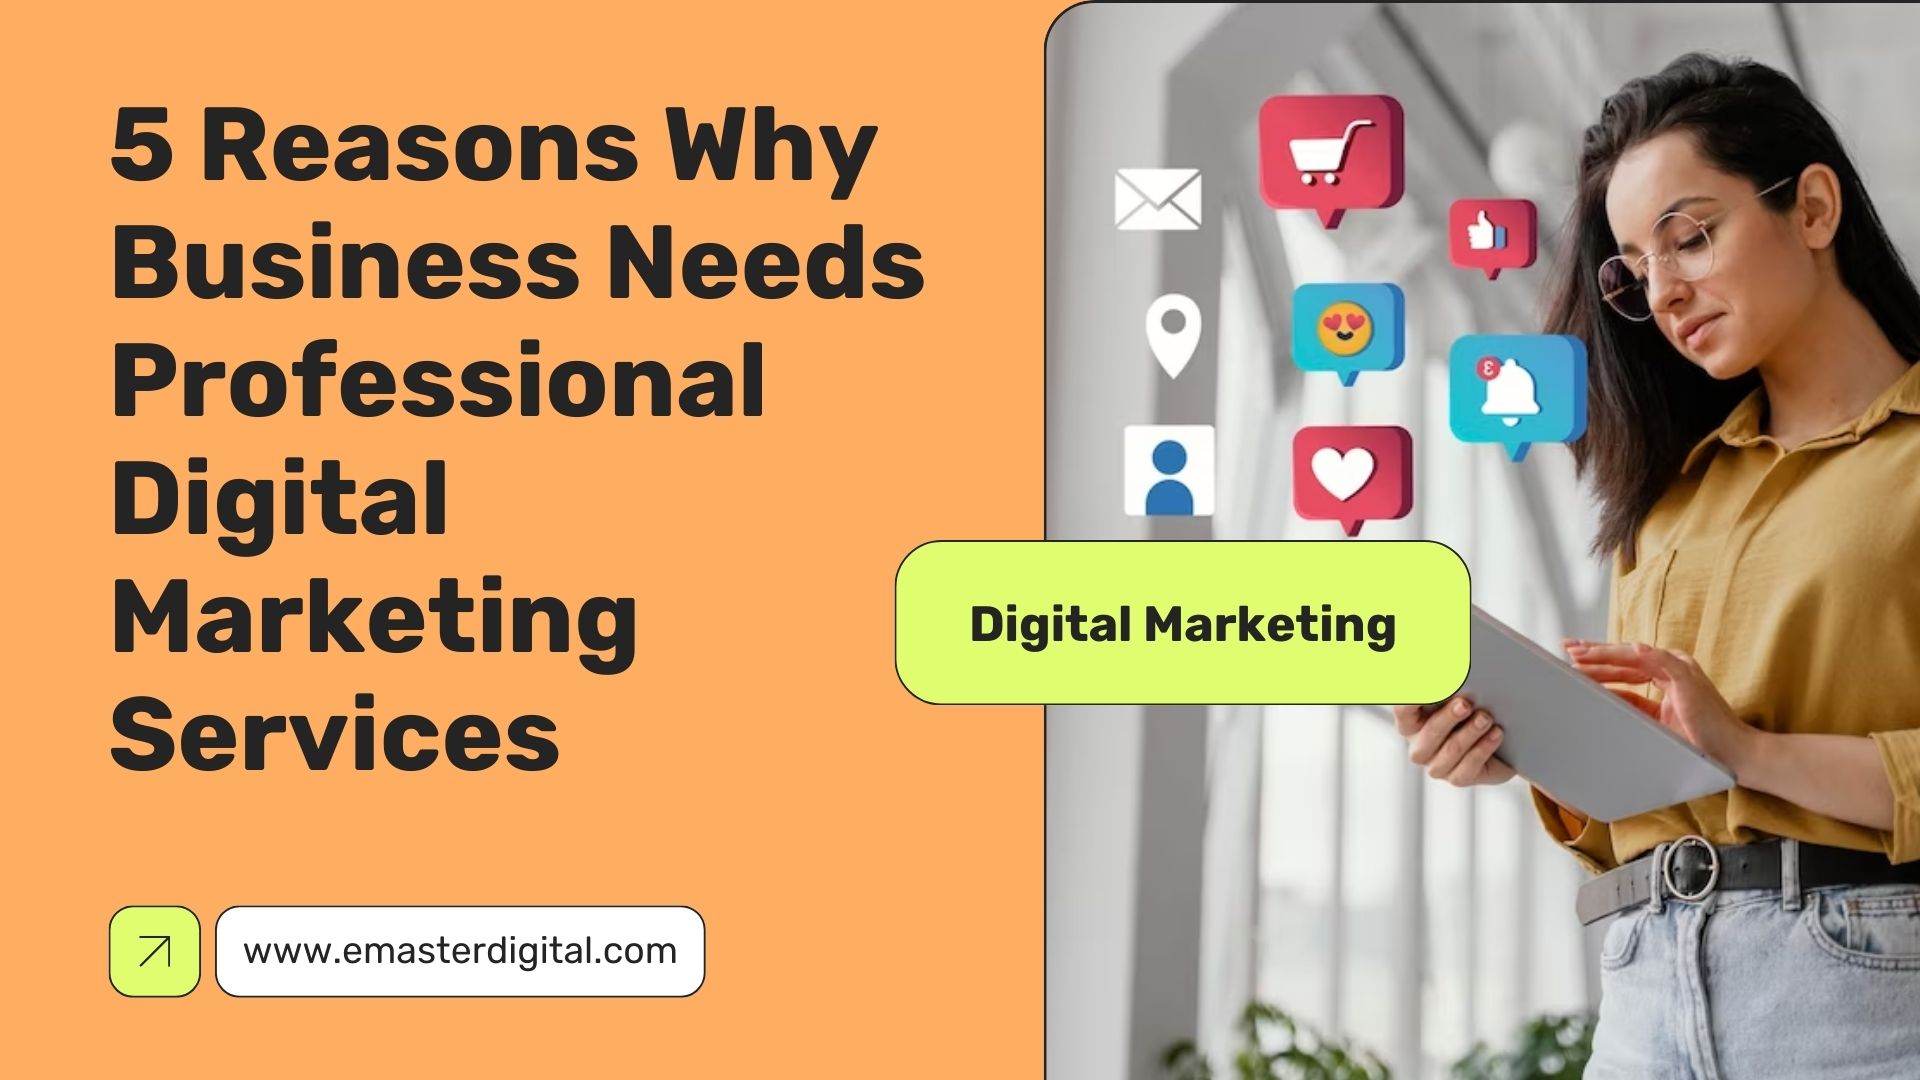 5 Reasons Why Business Needs Professional Digital Marketing Services